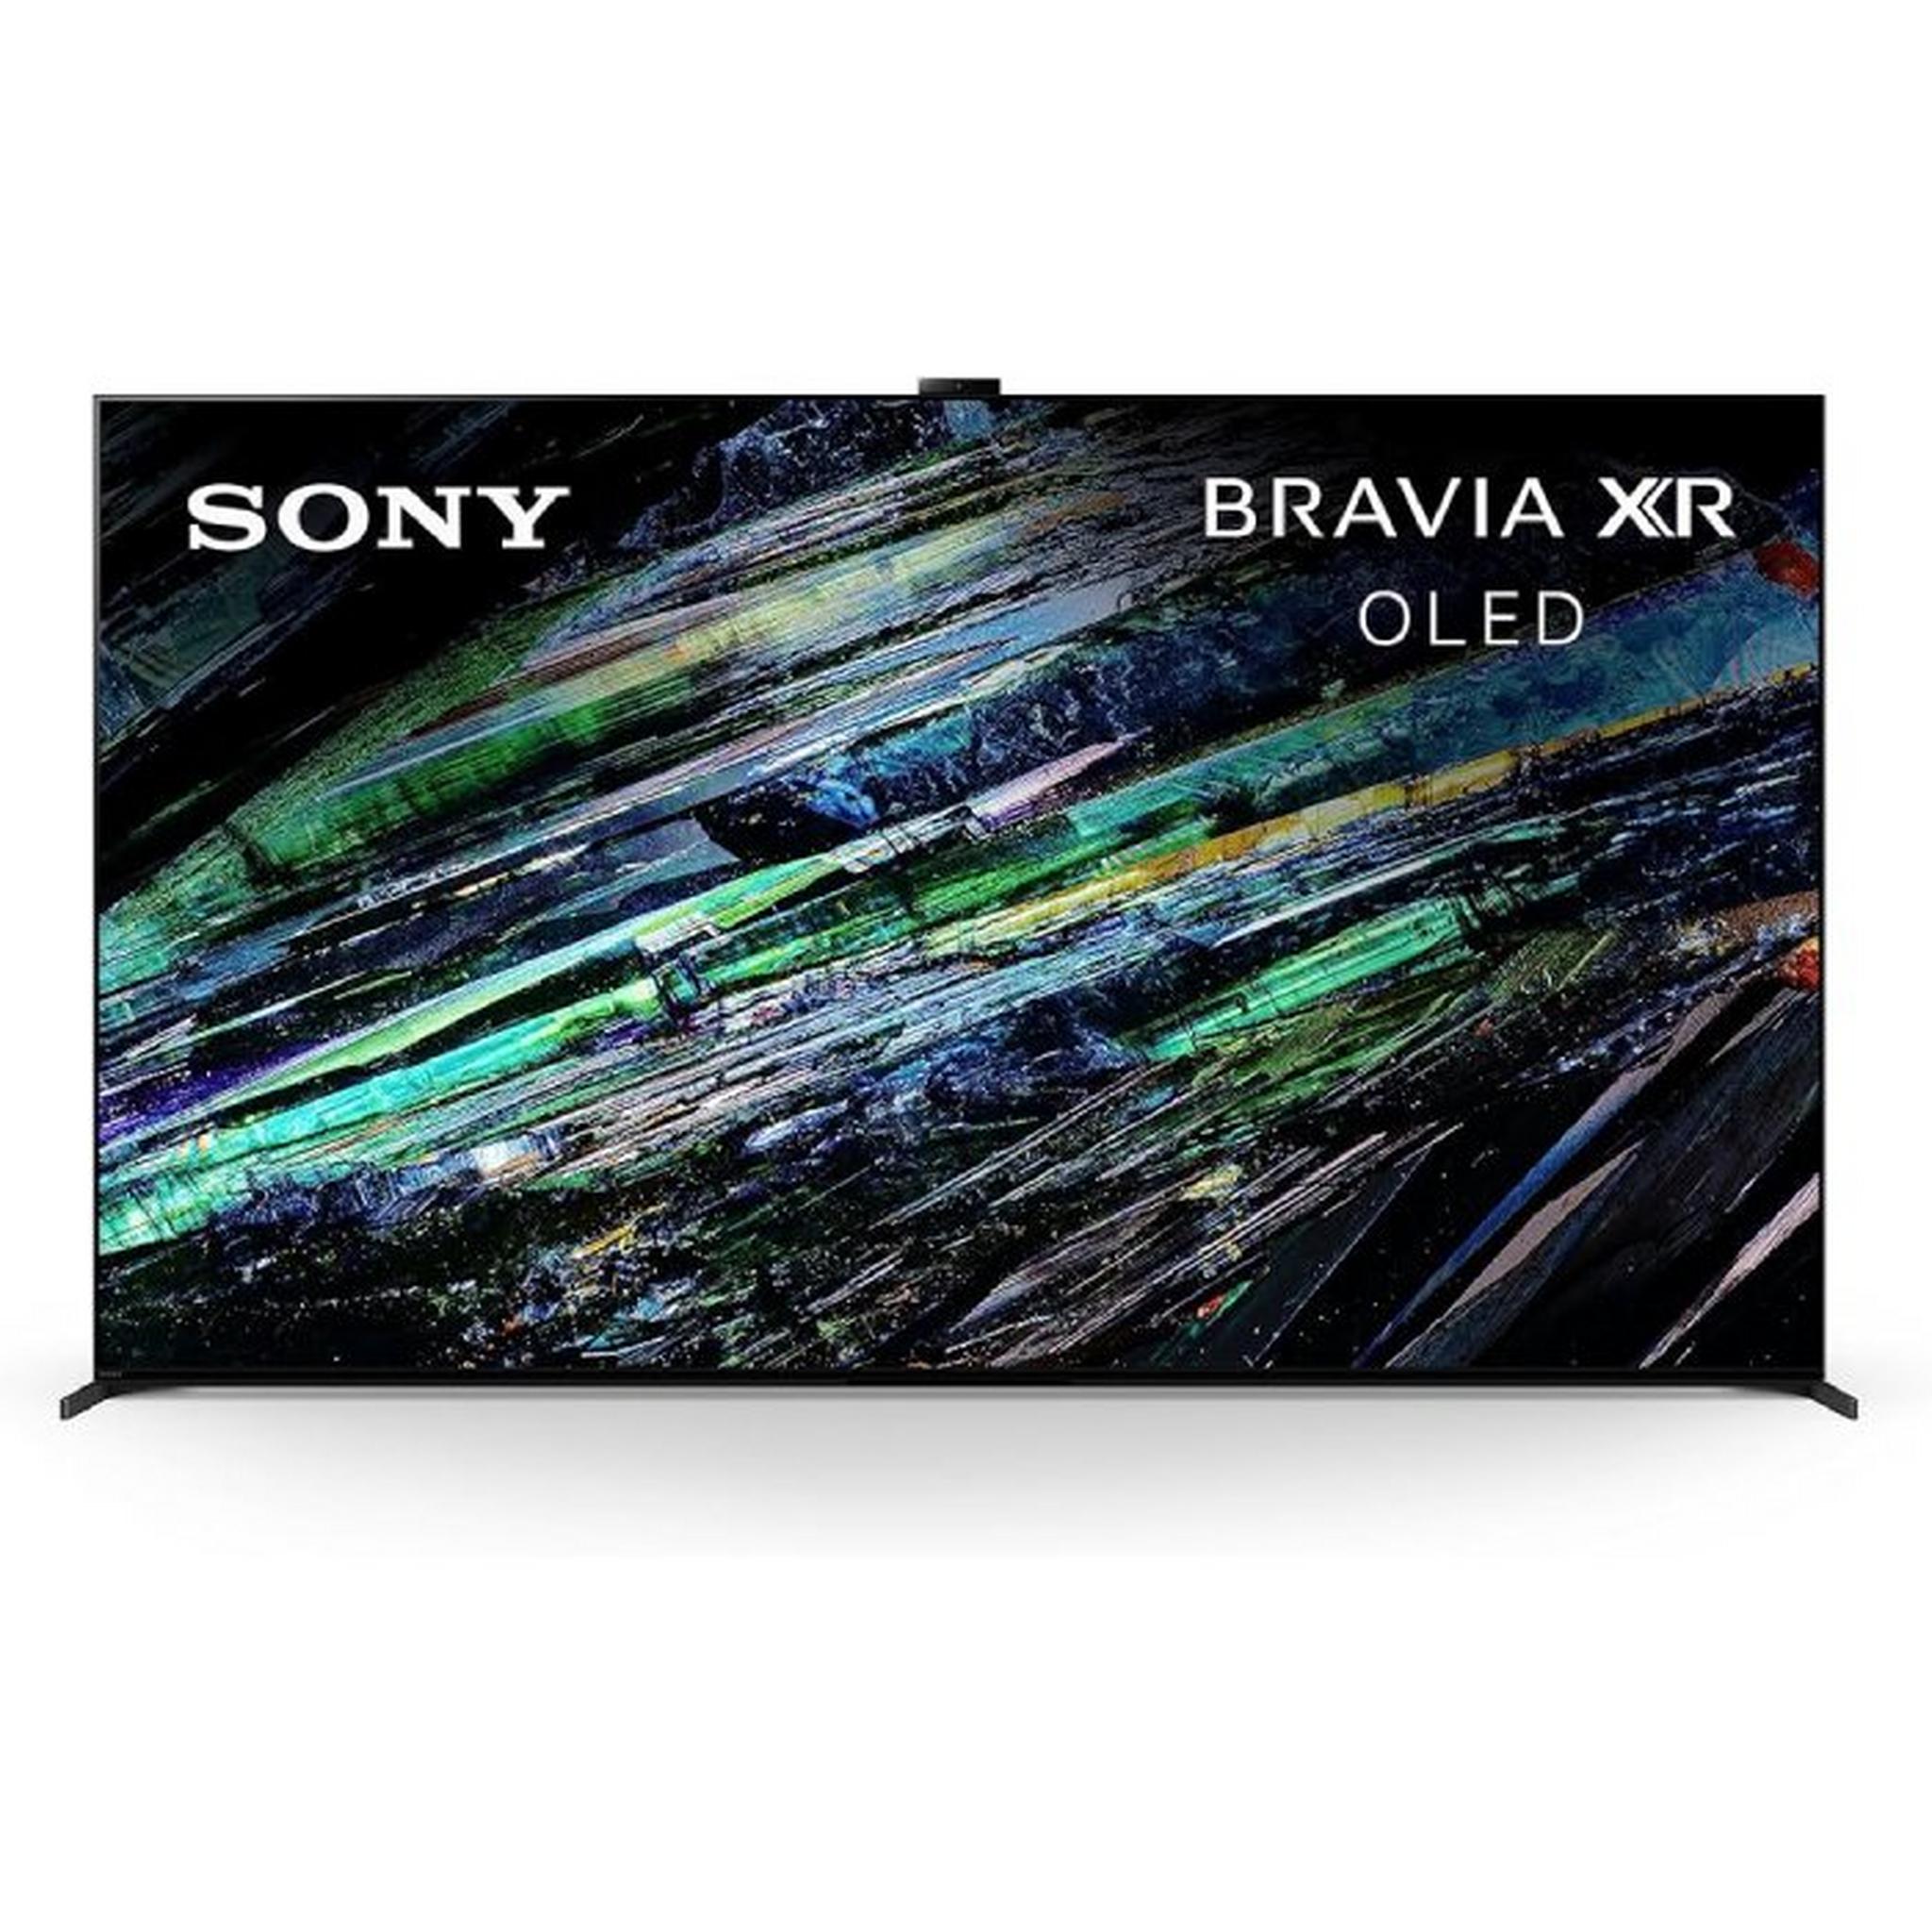 SONY 77-inch 4K UHD OLED Smart Android TV, XR-77A95L – Black